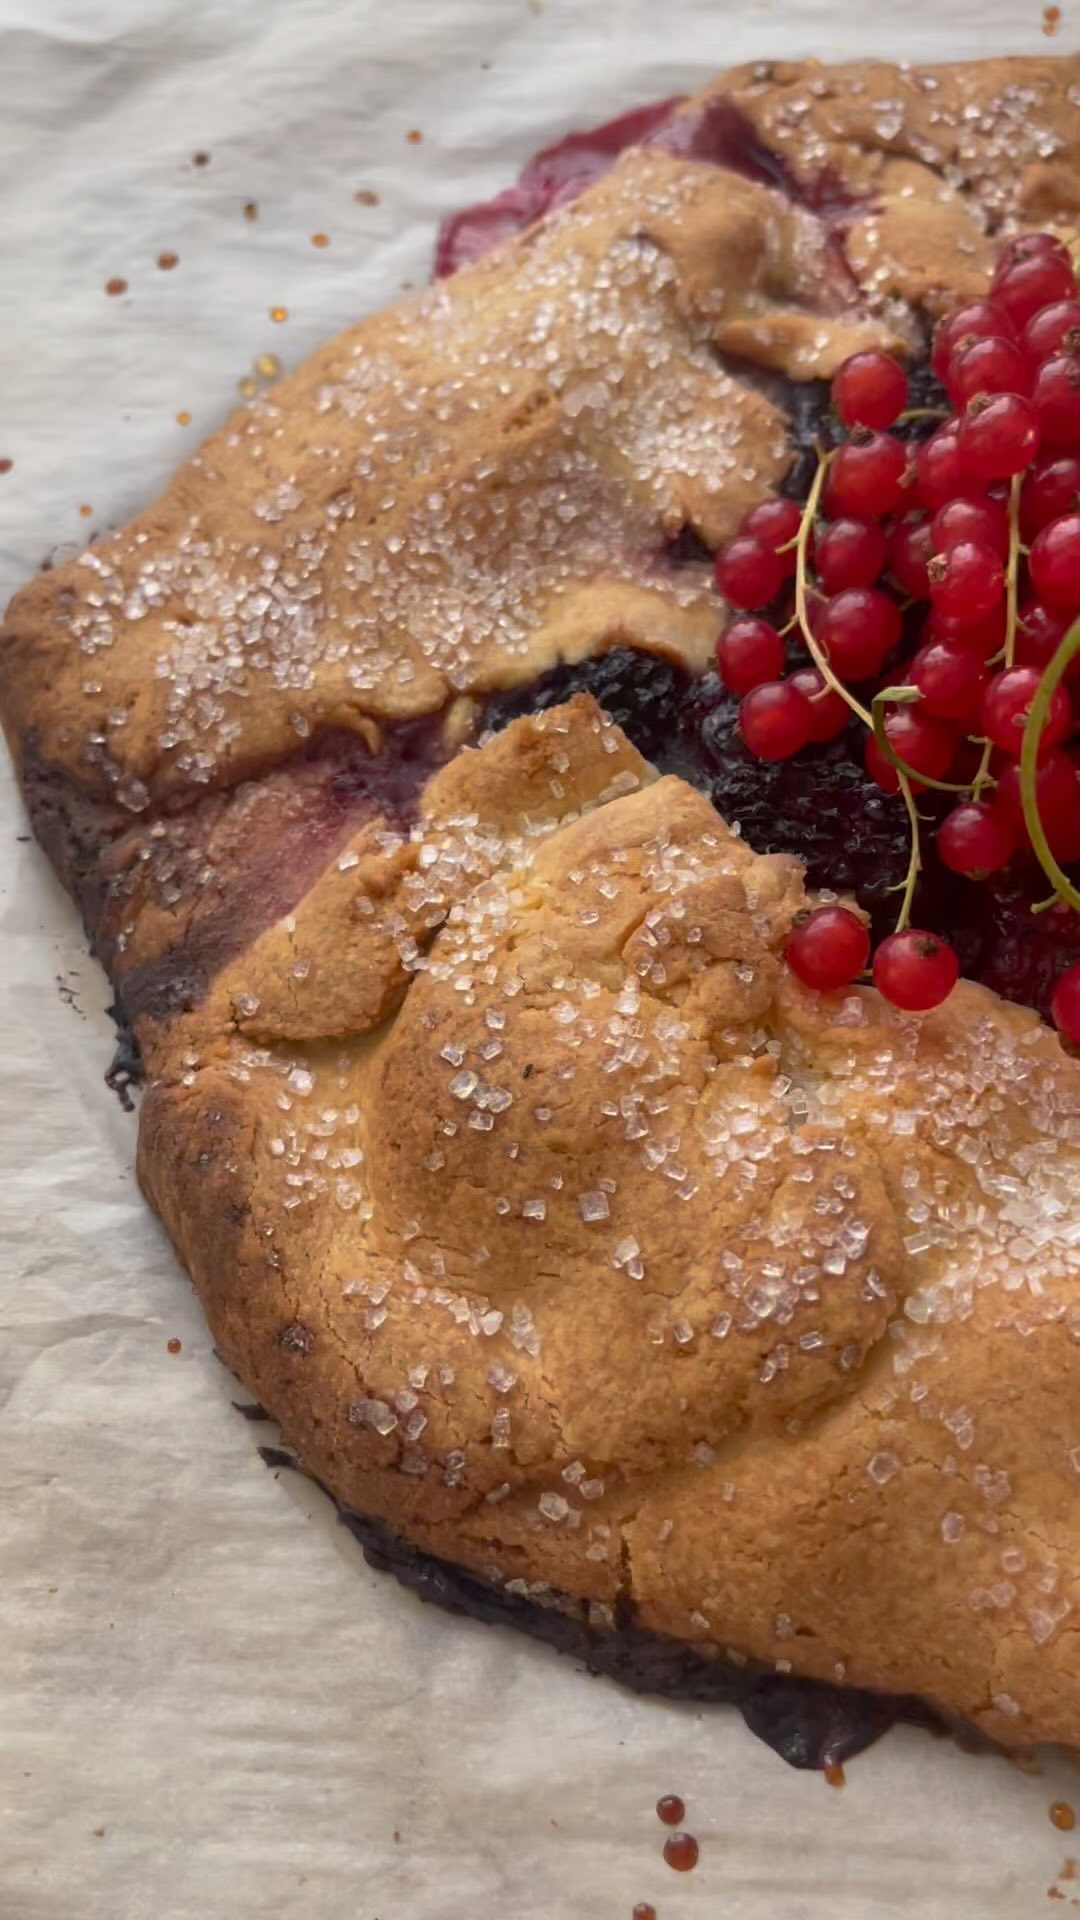 The recipe for my fresh berry galette is gluten free and now up on the DR site! It’s rustic so no fussy baking requirements! Don’t forget to visit the website for more end-of-summer recipes and easy dinner ideas 
*
*
*
#fruitcakes #berries #strawberrycake #cherries #blackberry #glutenfreebaking #almondflour #healthydessert #easydessert #summerdessert #galette #easycake #roniproter #dinnerreinvented